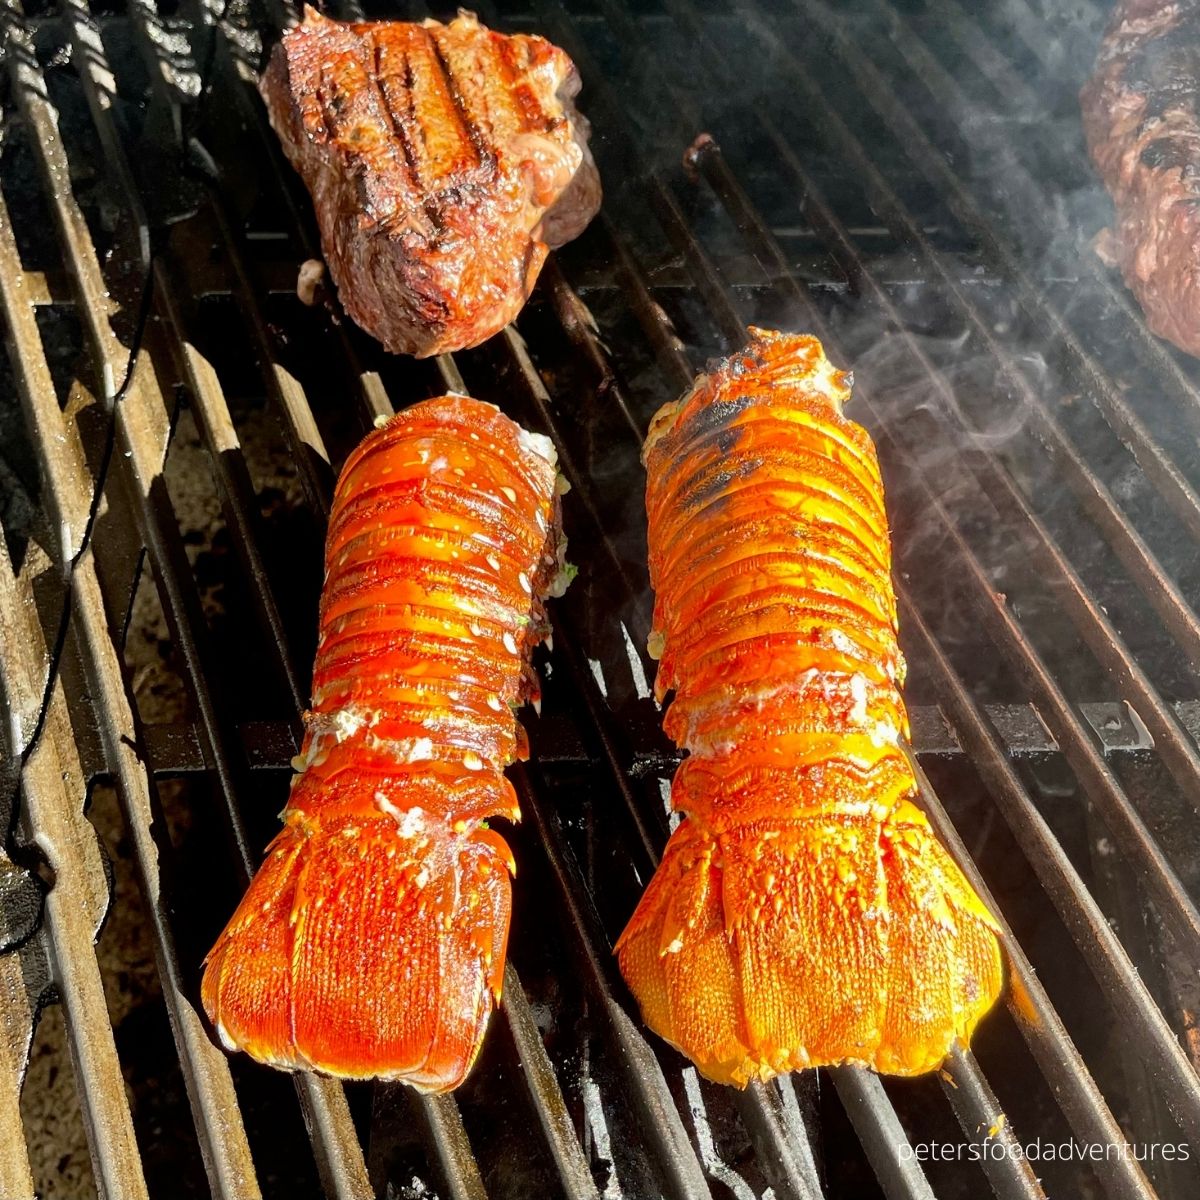 grilling lobster tails